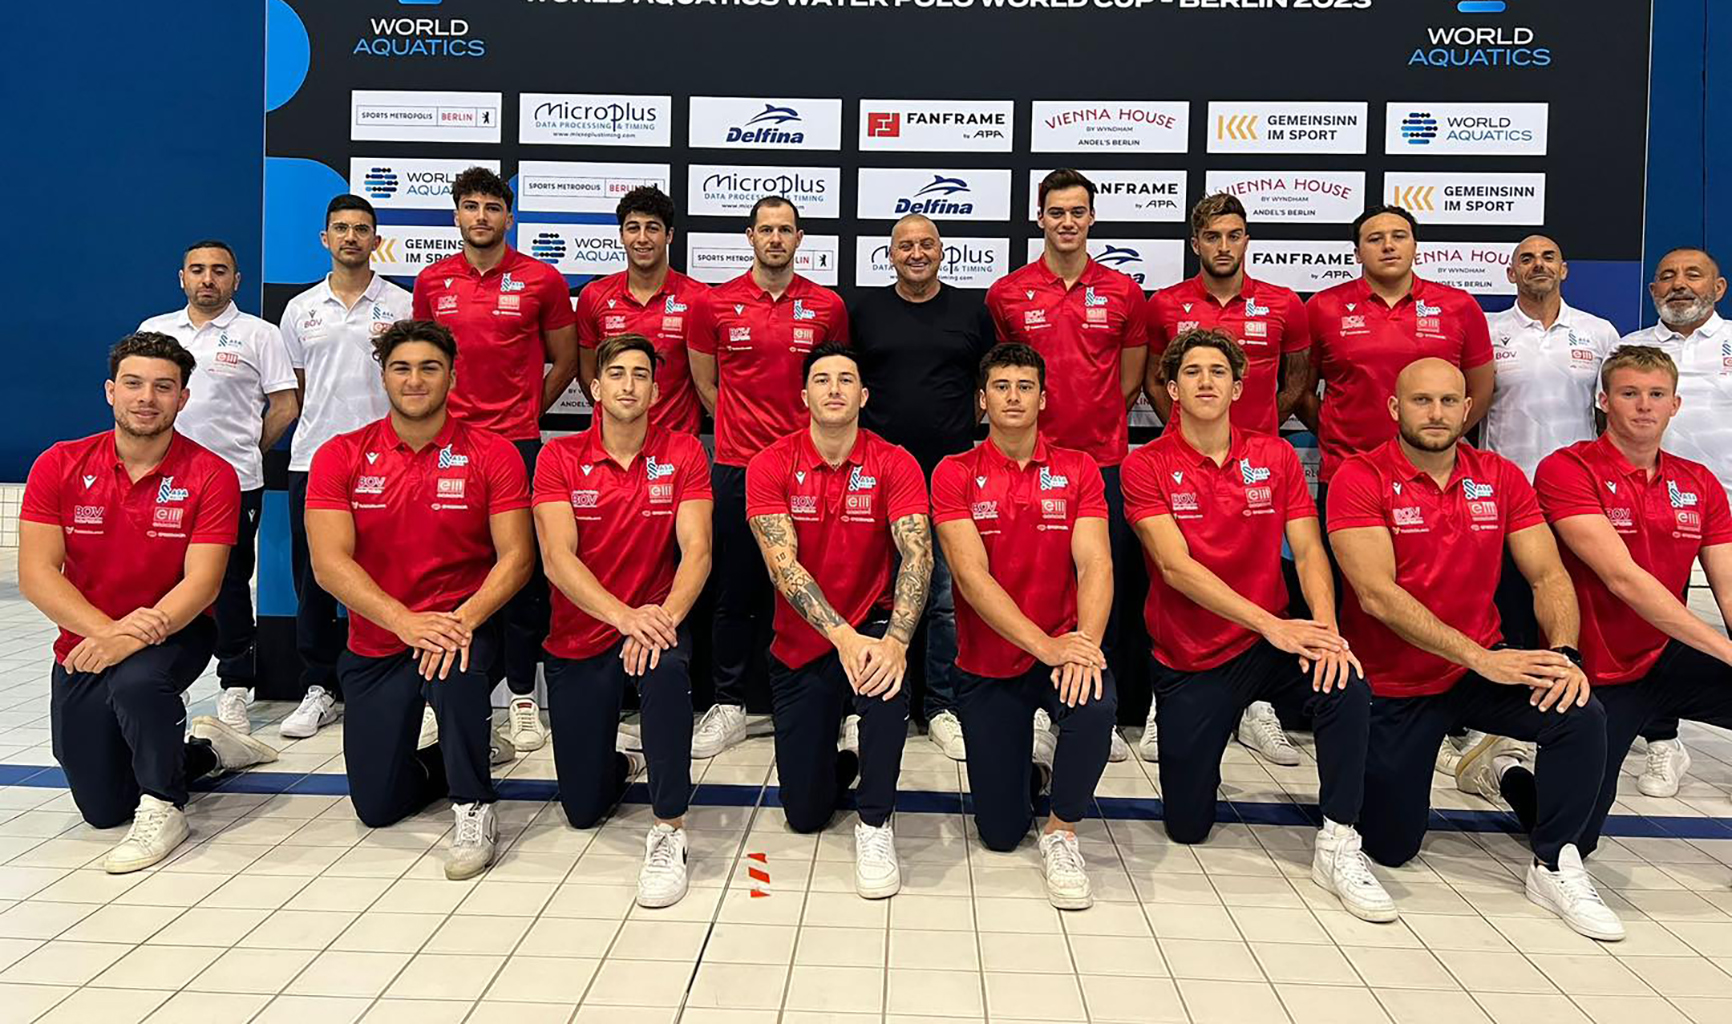 Malta waterpolo place sixth after defeat to superior Iran team - SportsDesk